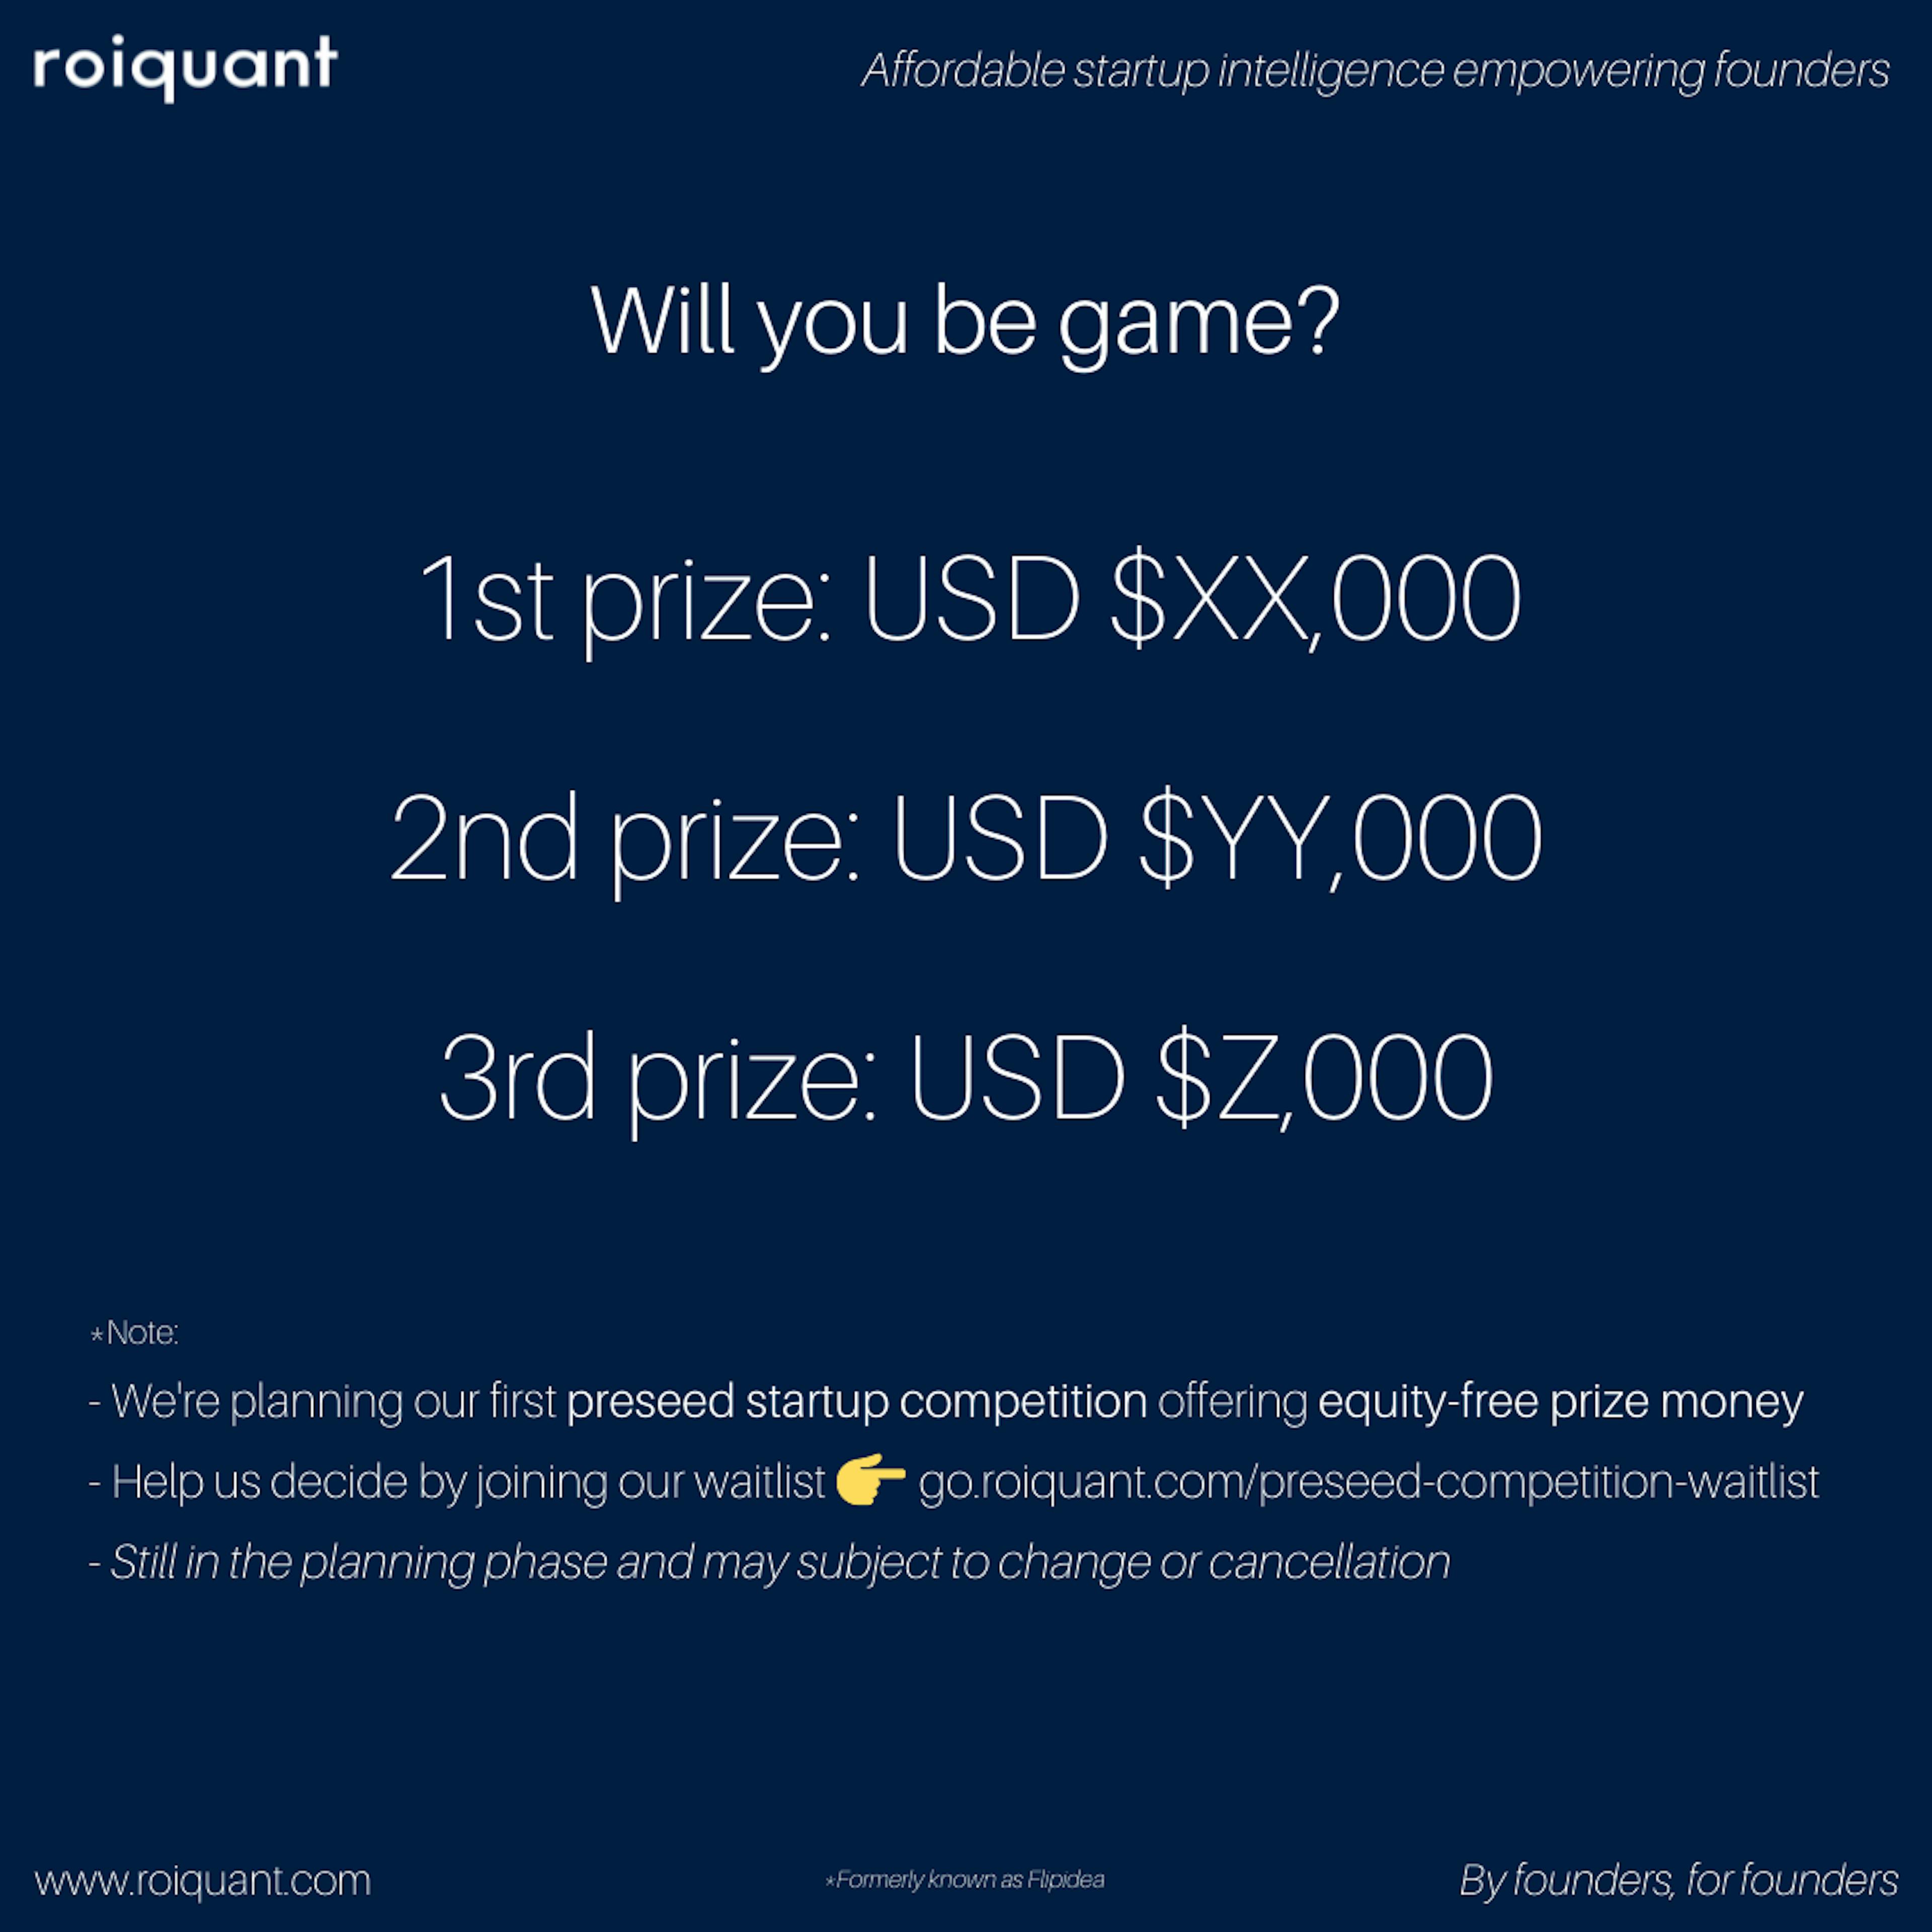 For more information, join roiquant's preseed startup competition waiting list